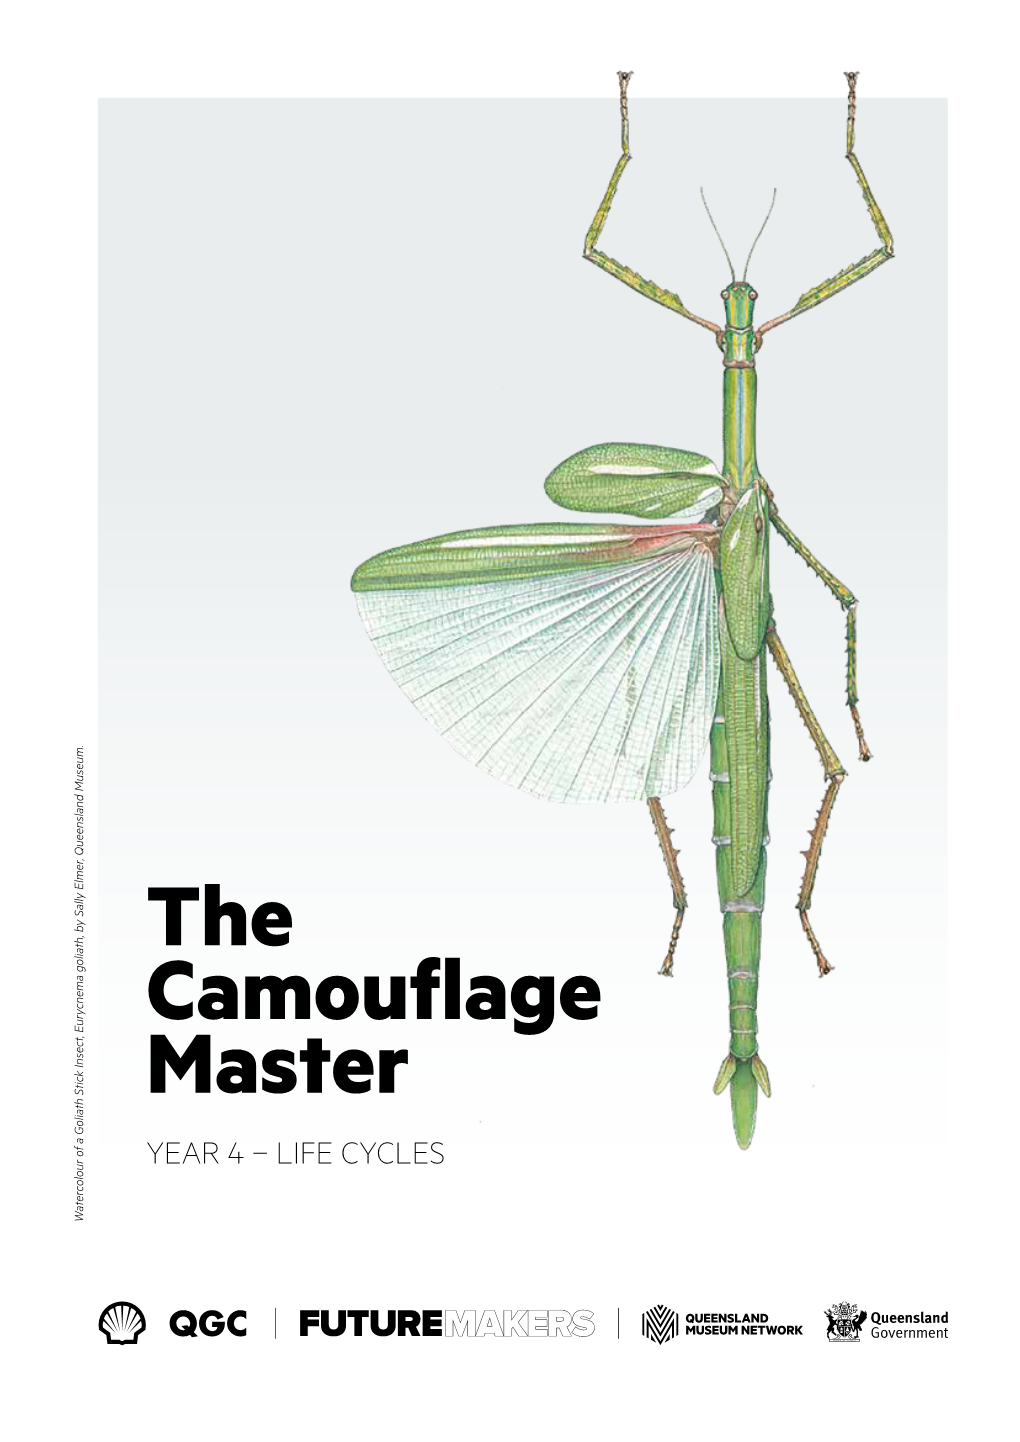 The Camouflage Master YEAR 4 – LIFE CYCLES Watercolour of a Goliath Stick Insect, Eurycnema Goliath, by Sally Elmer, Queensland Museum